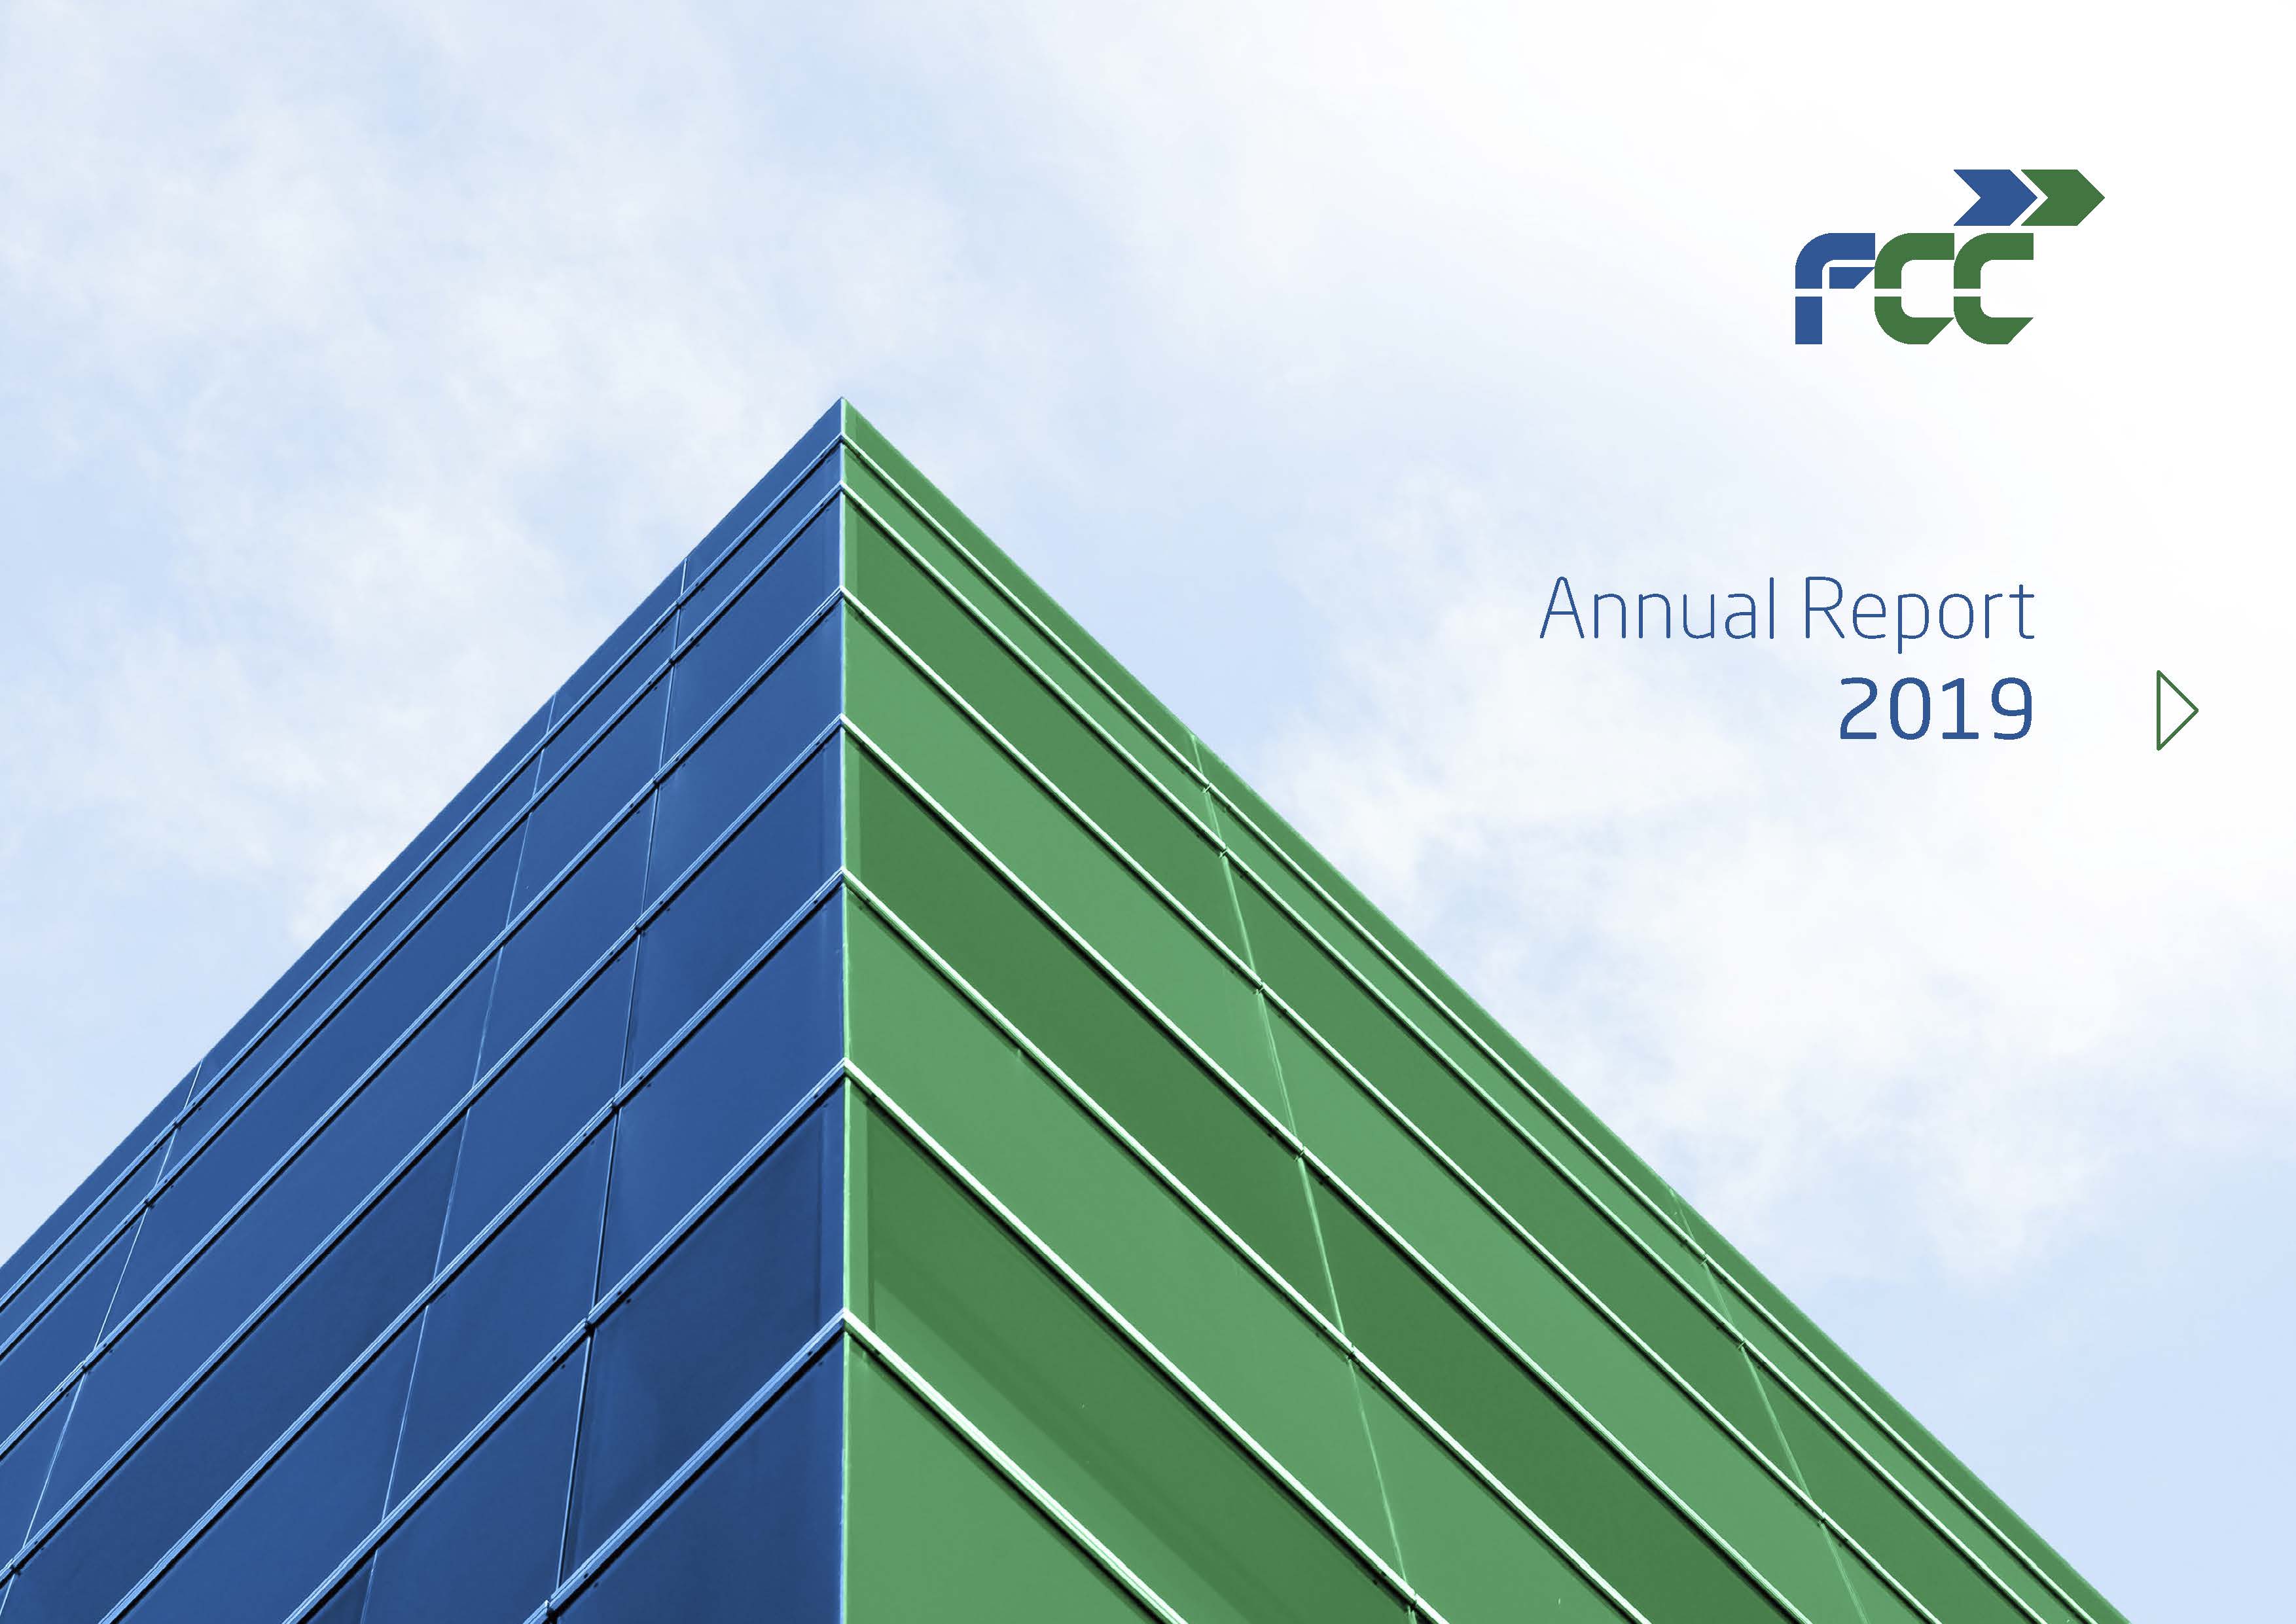 FCC Group Annual Report